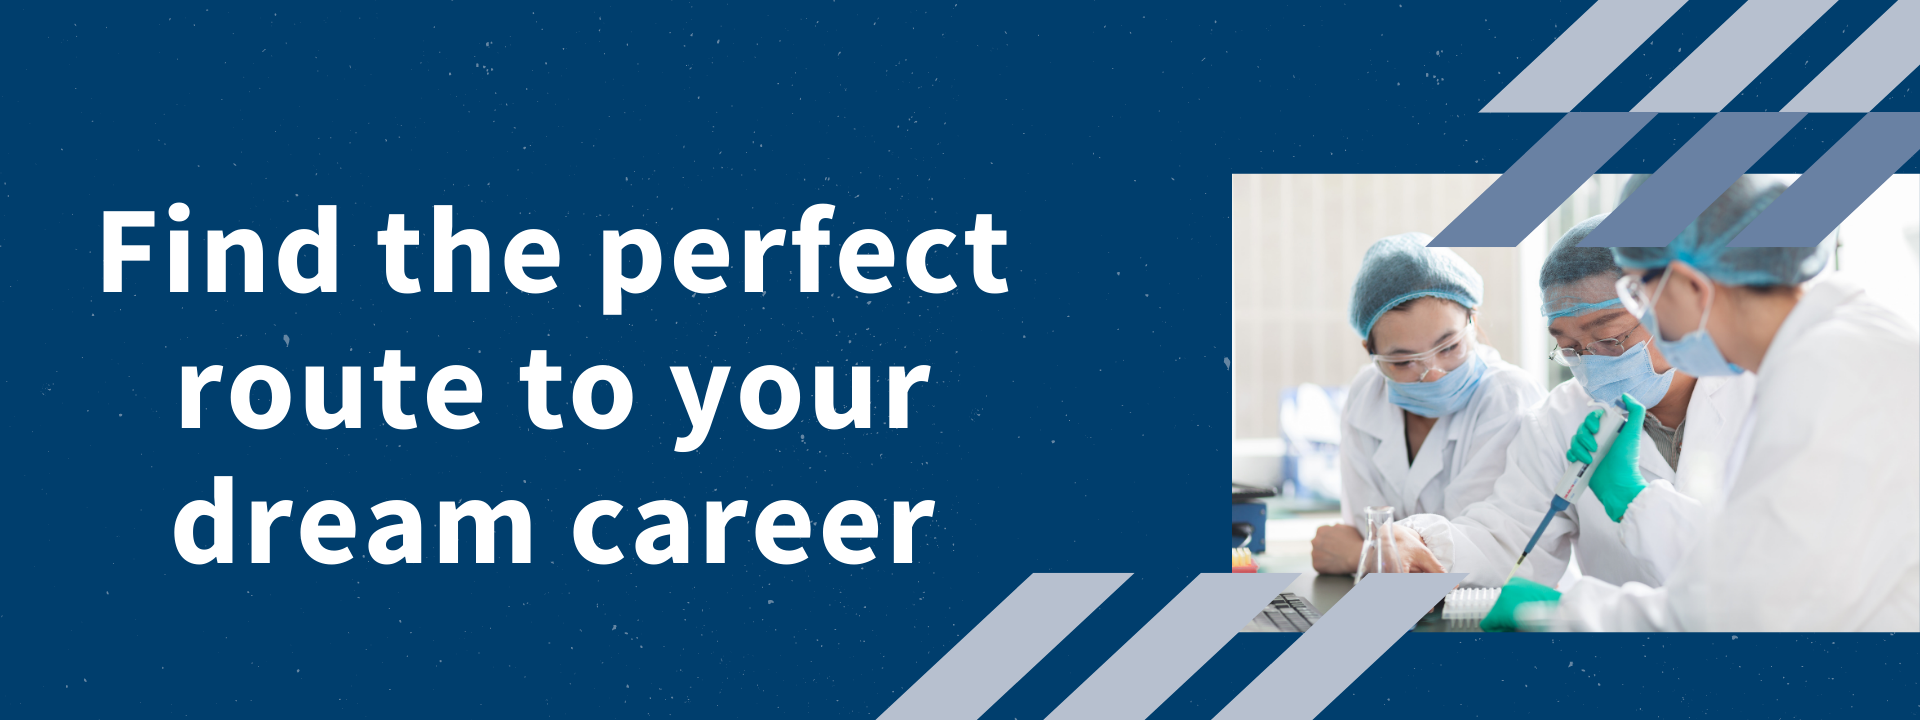 Find the perfect route to your dream career